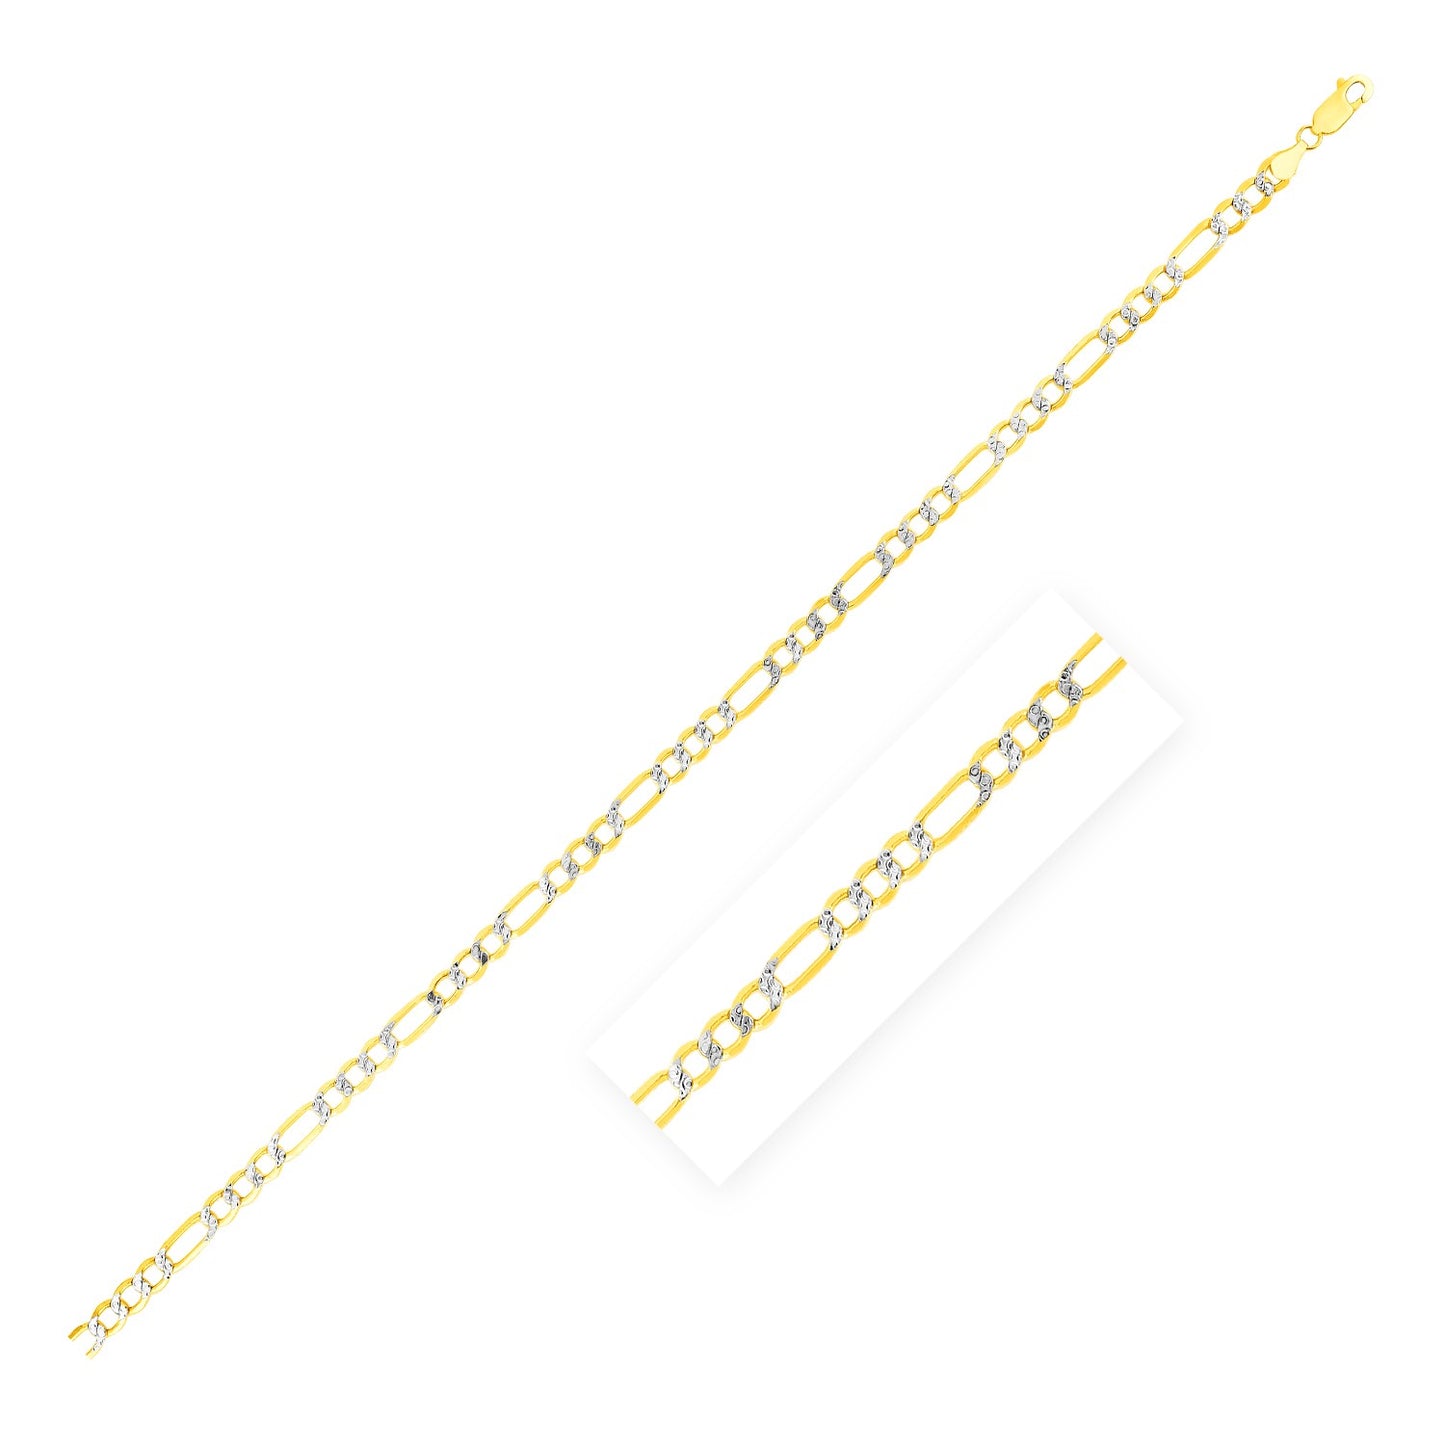 Lite White Pave Figaro Chain in 14k Two Tone Gold (3.4 mm)